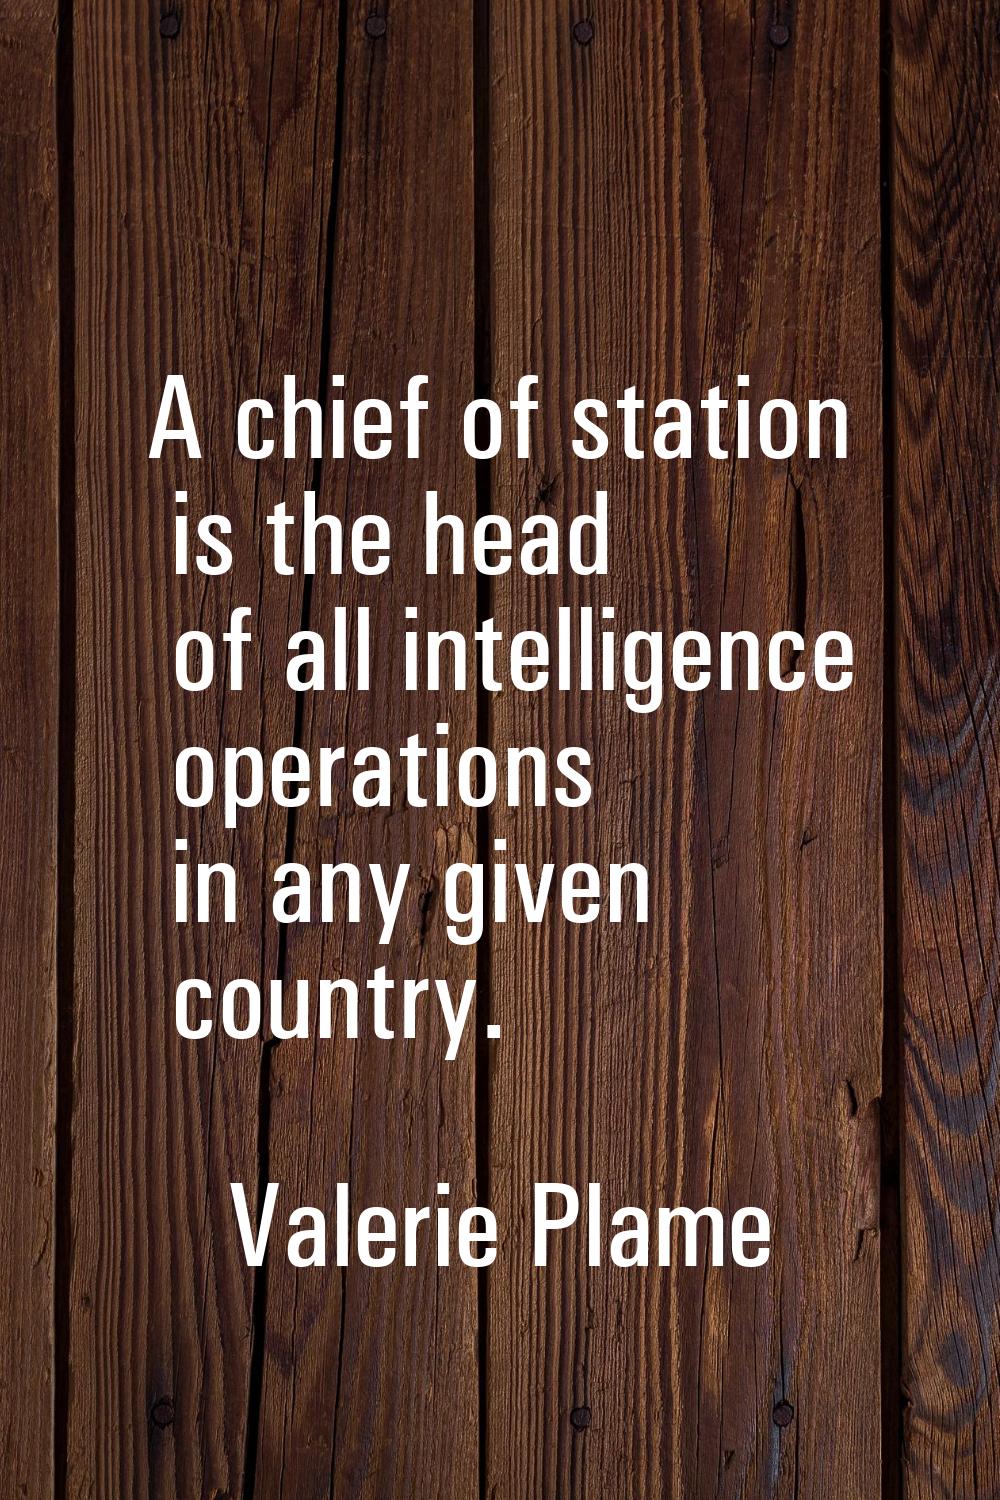 A chief of station is the head of all intelligence operations in any given country.